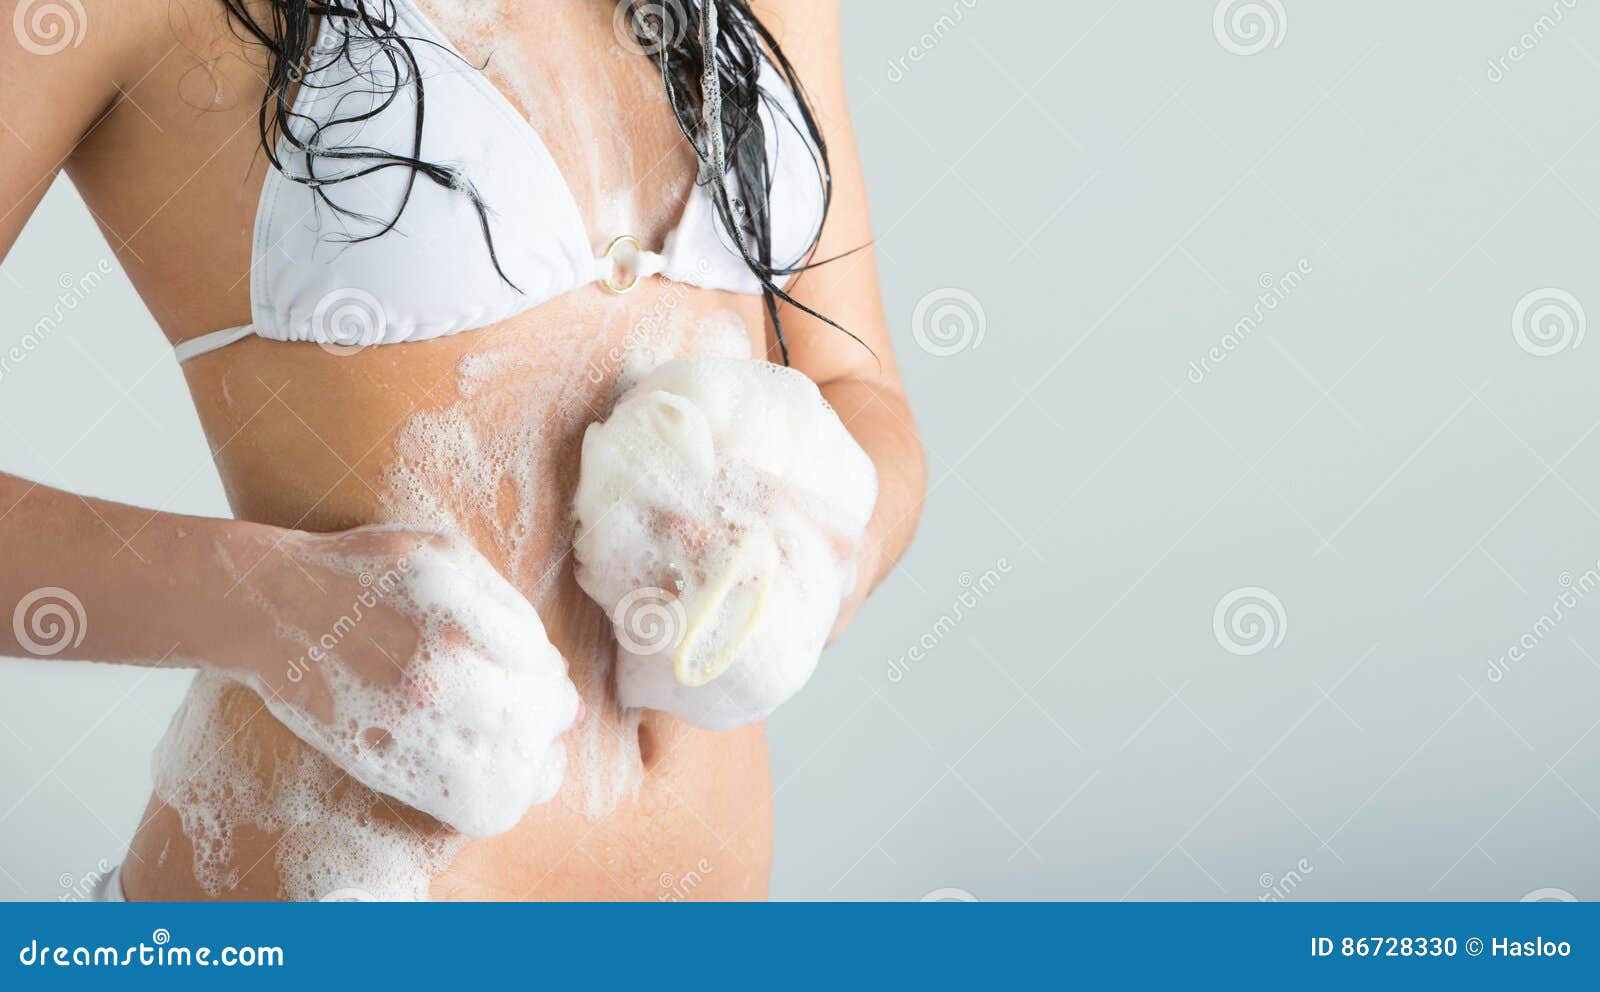 Unrecognizable Woman Washing Herself at Shower with Foam Stock